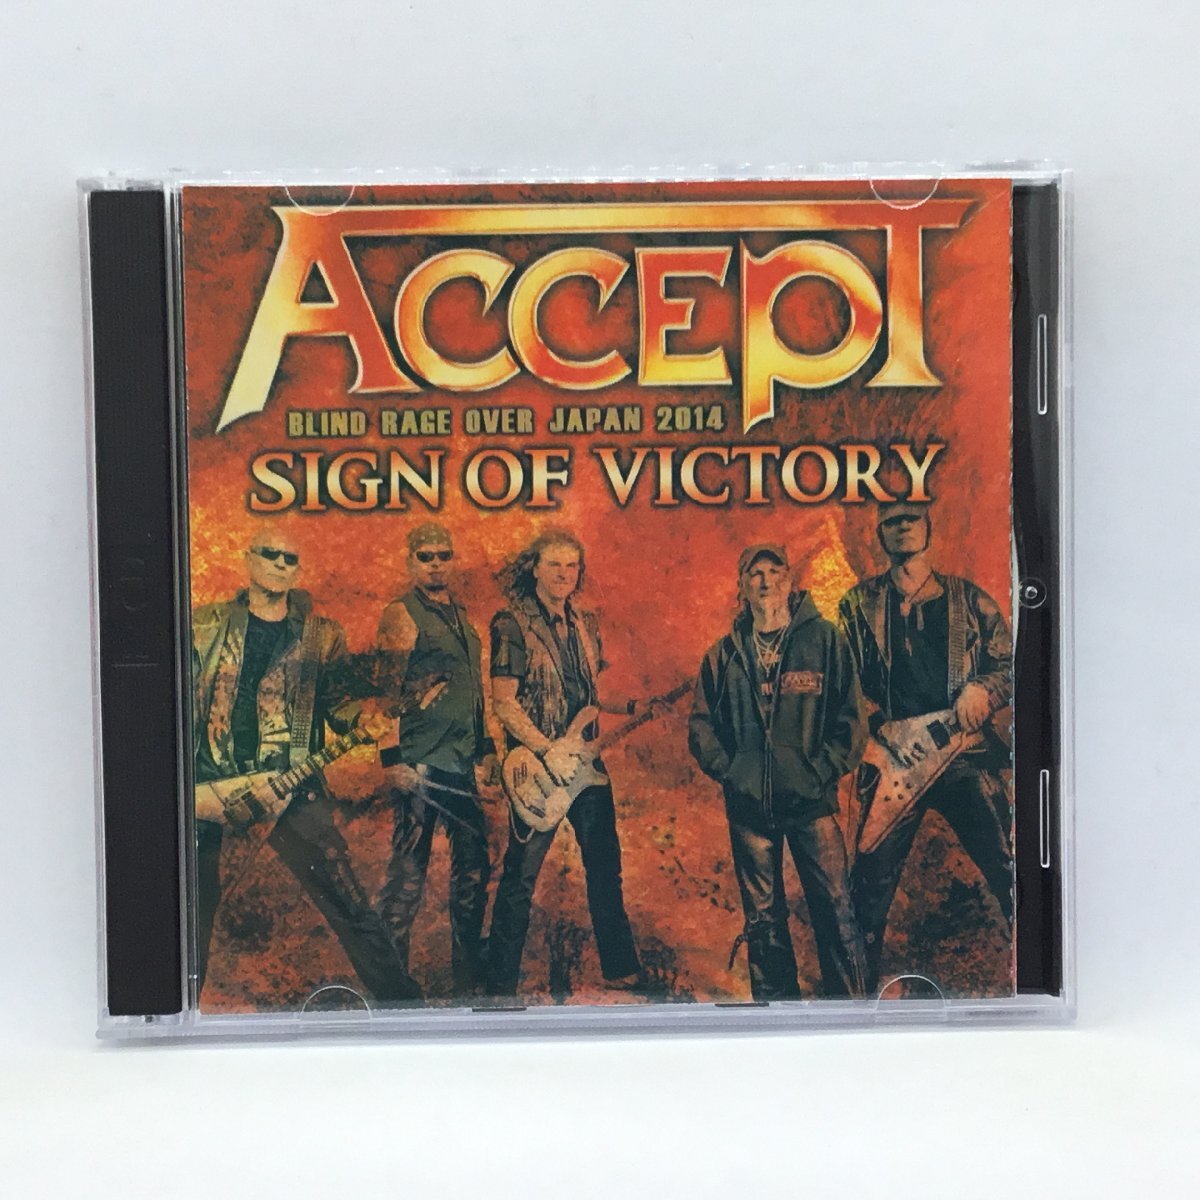 CD-R◇ACCEPT/BLIND RAGE OVER JAPAN 2014 SIGN OF VICTORY (2CD-R) SY-1245の画像1